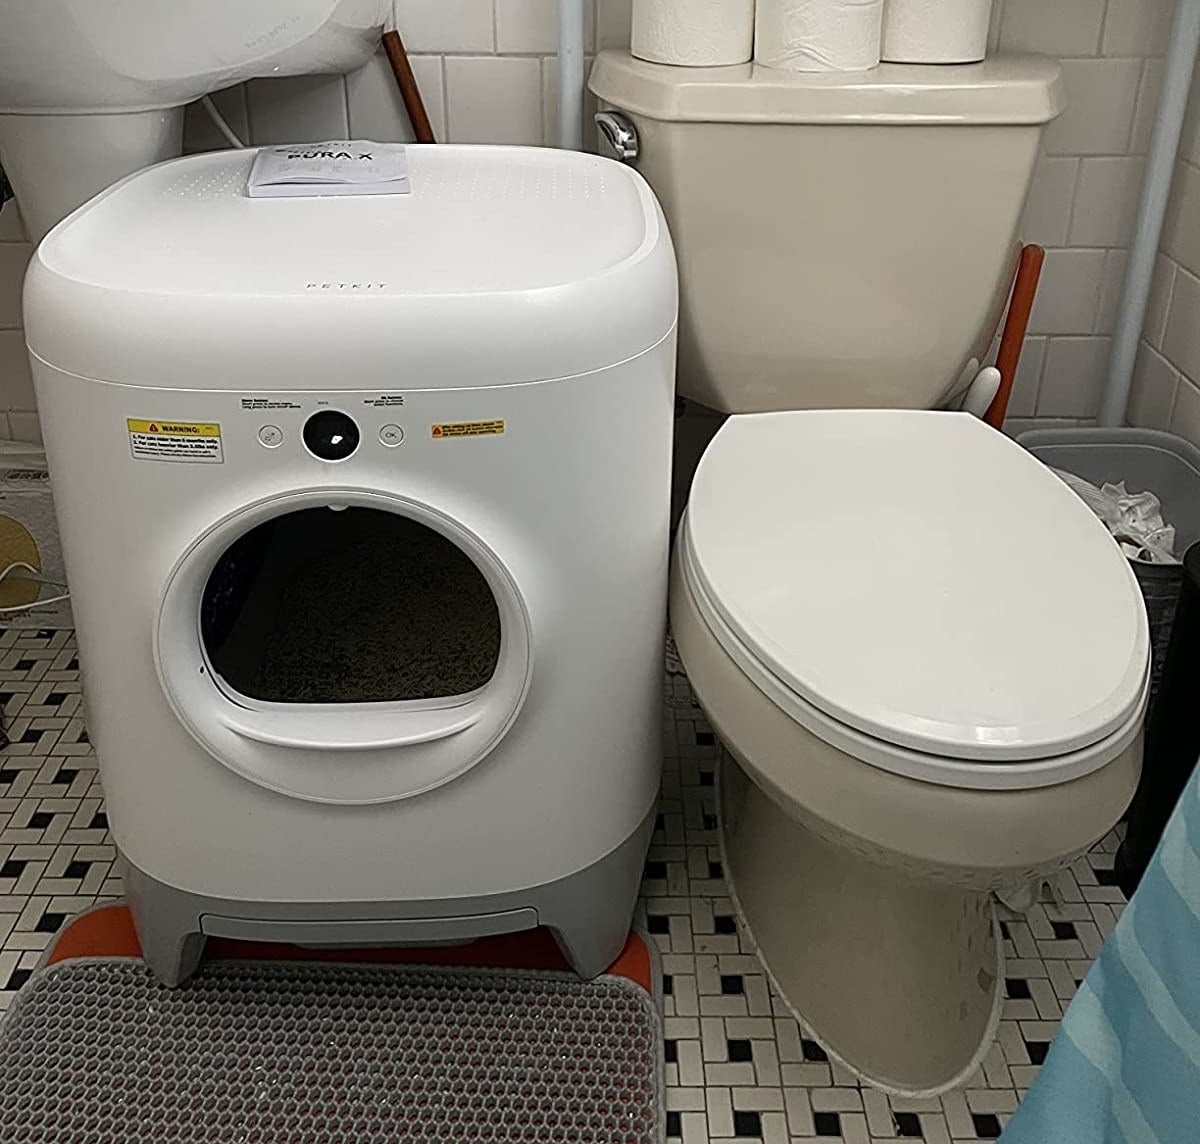 the automatic cleaner next to toilet in bathroom